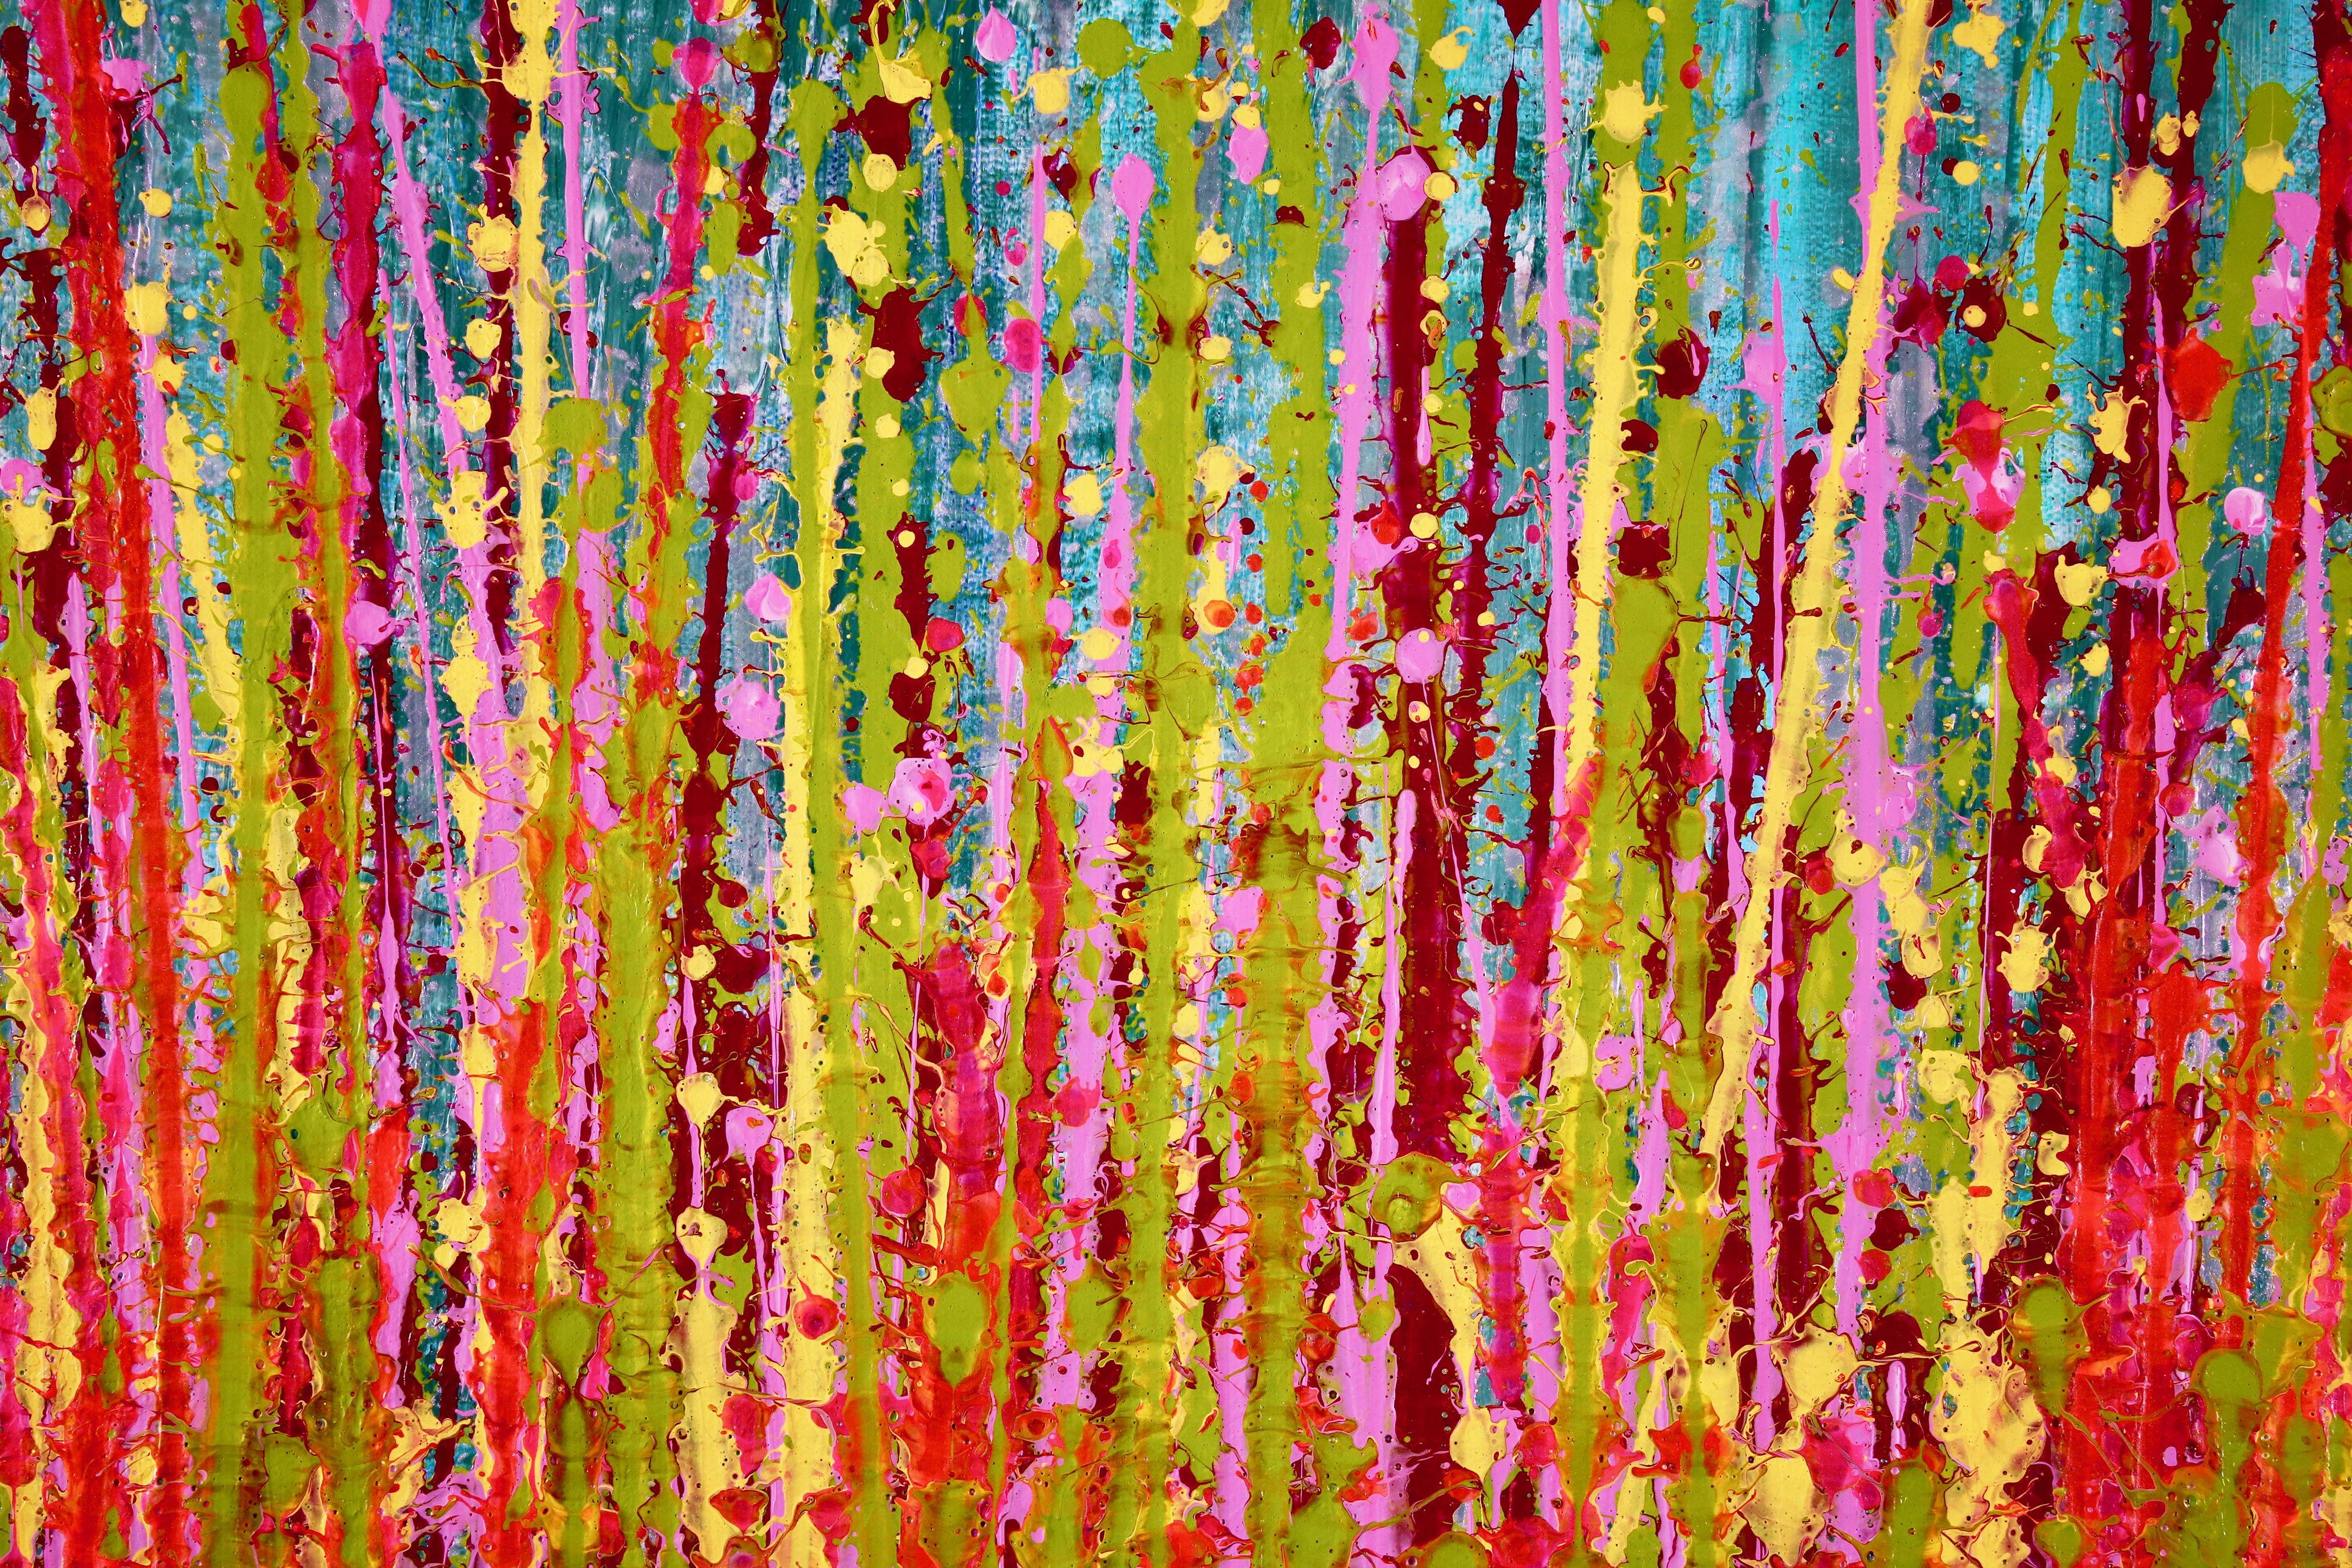 DEEP EDGE CANVAS READY TO HANG!     Vibrant colors in sequence making a very bold statement!    All colors are mixed with mica particles, this is an iridescent painting. Arrives mounted in a deep edge wooden frame ready to hang! Signed in front.   